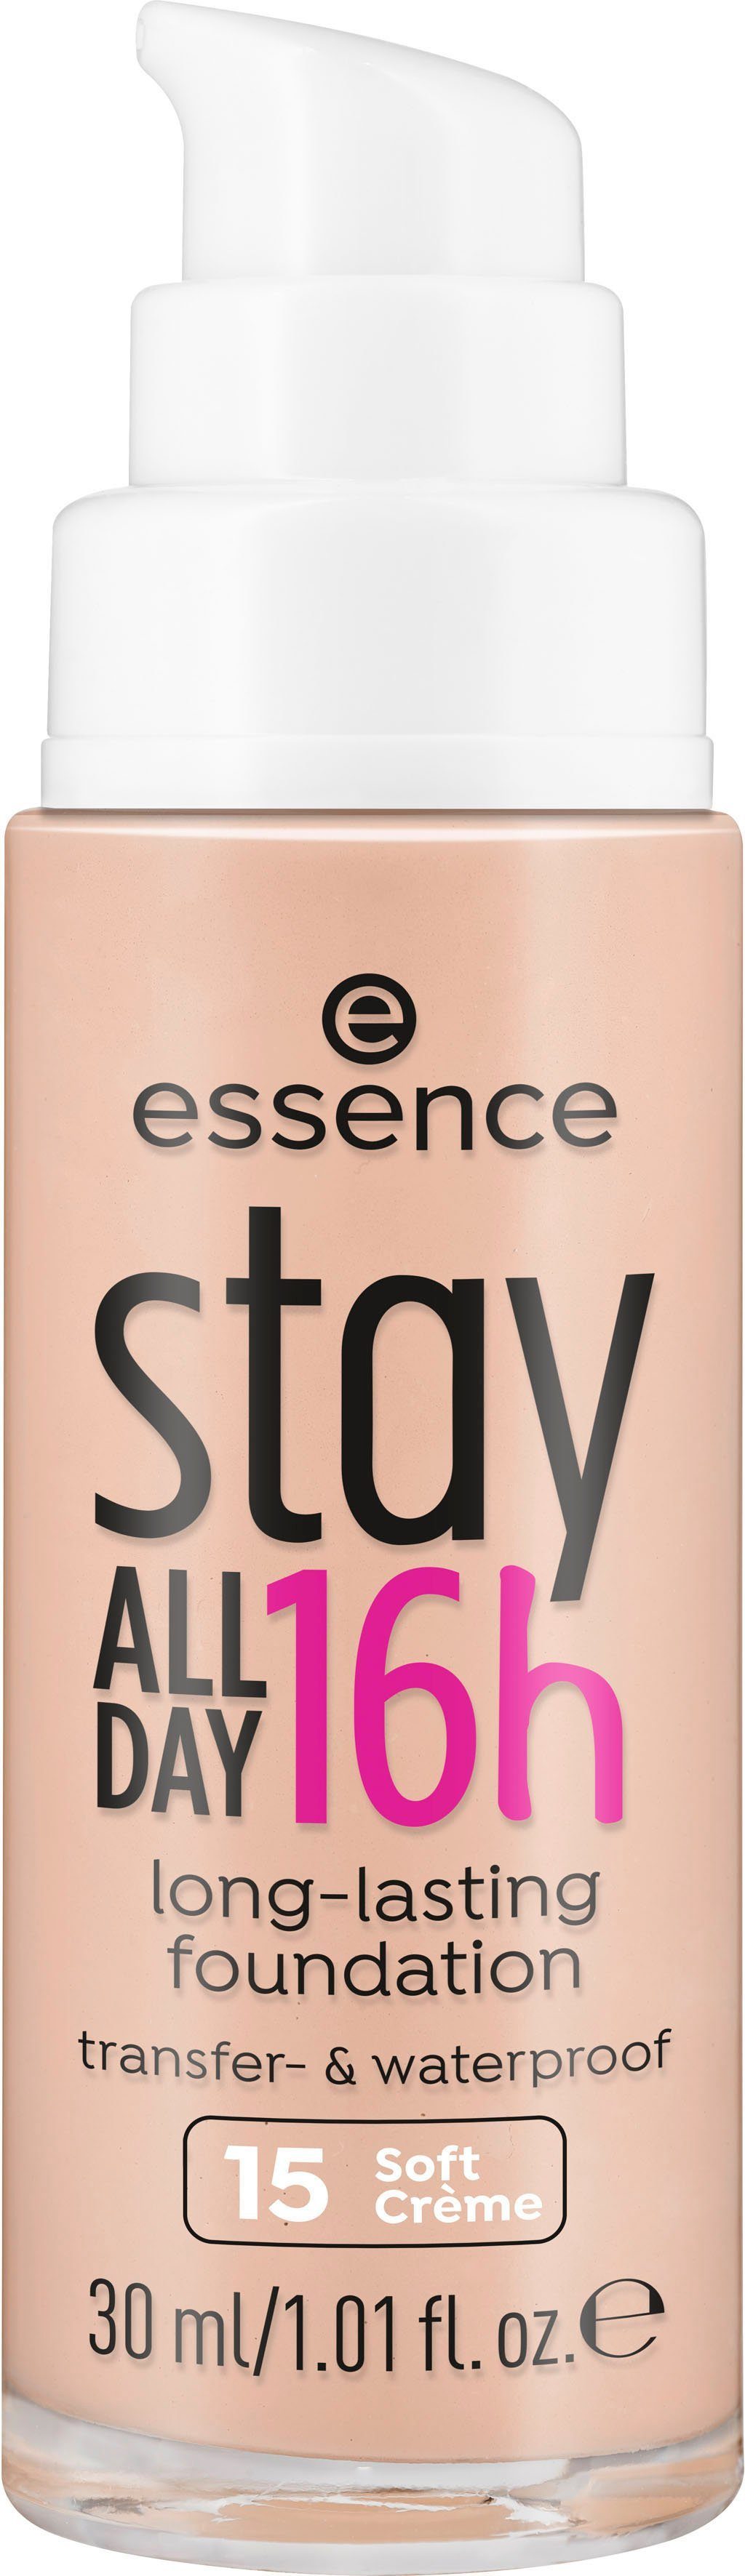 Soft ALL 3-tlg. stay 16h Essence Foundation DAY Creme long-lasting,